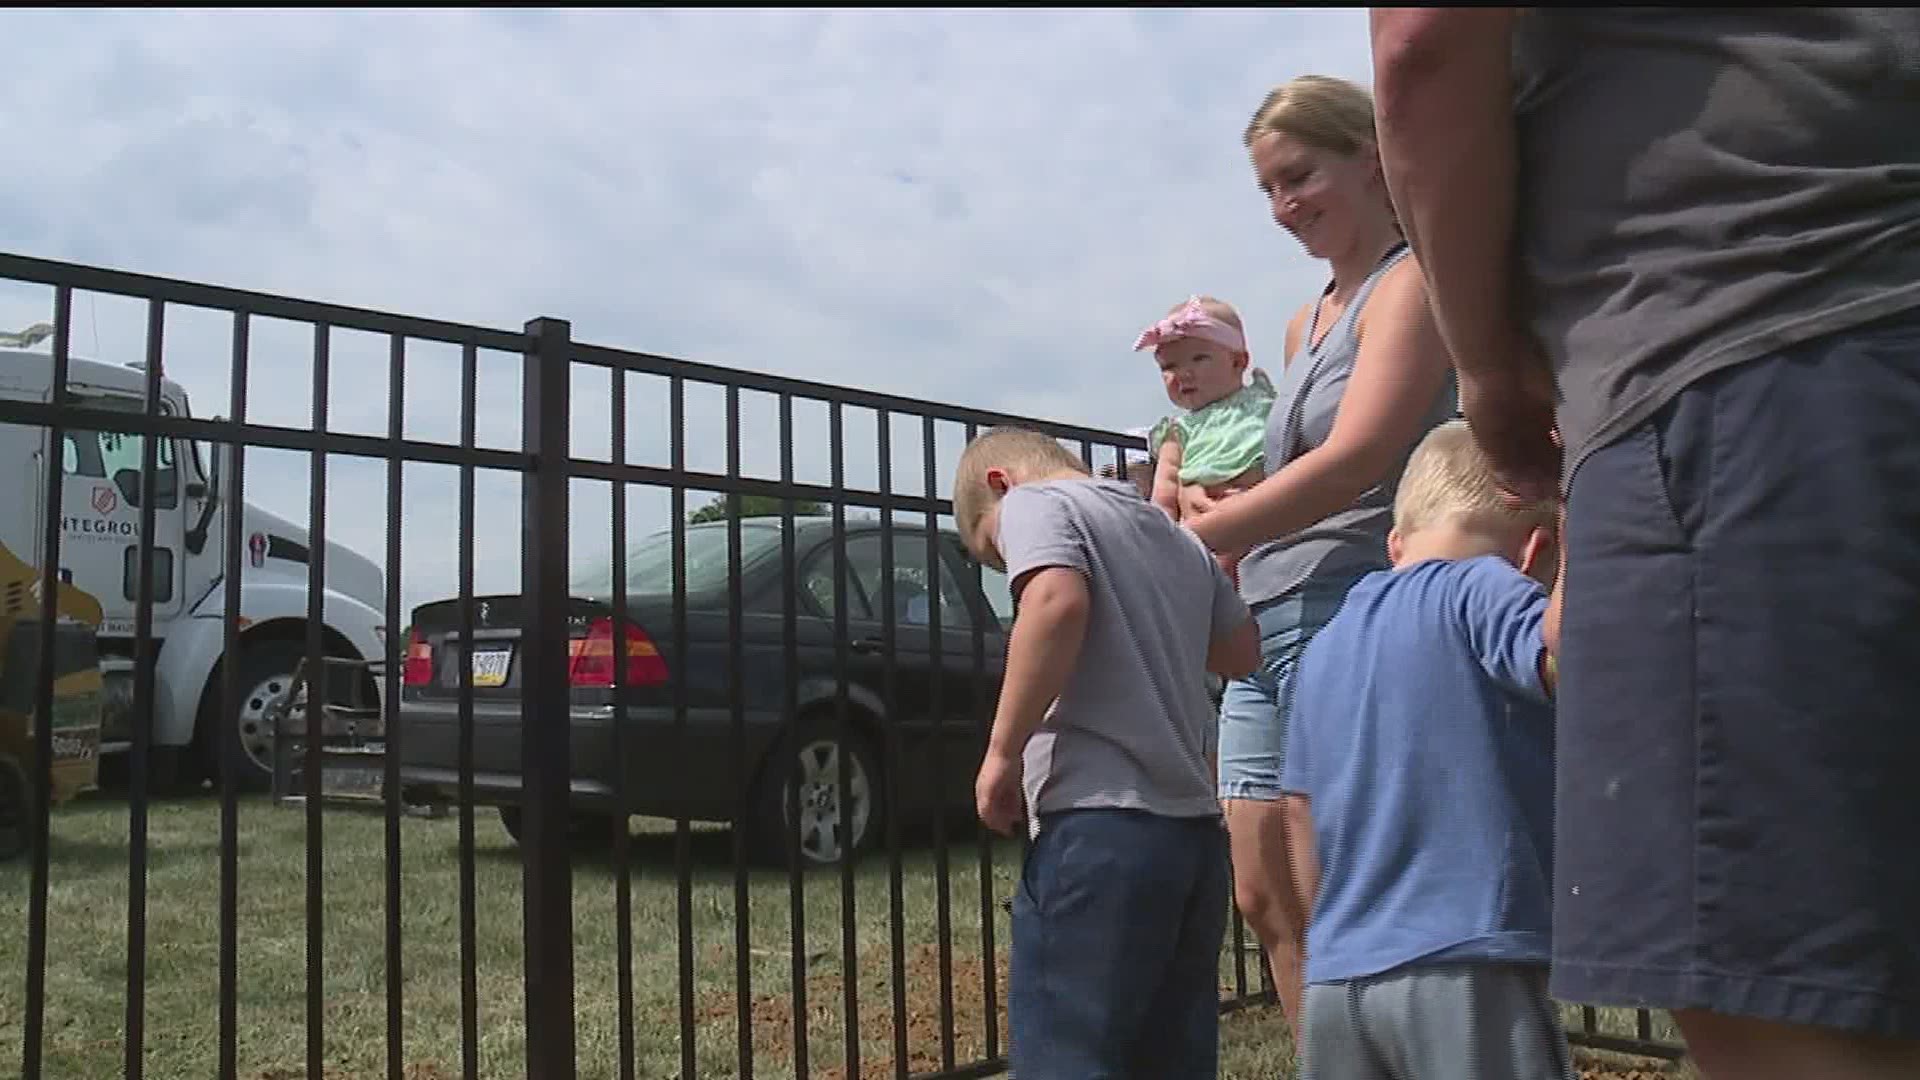 A fence was donated and installed to help keep the special needs child safe.